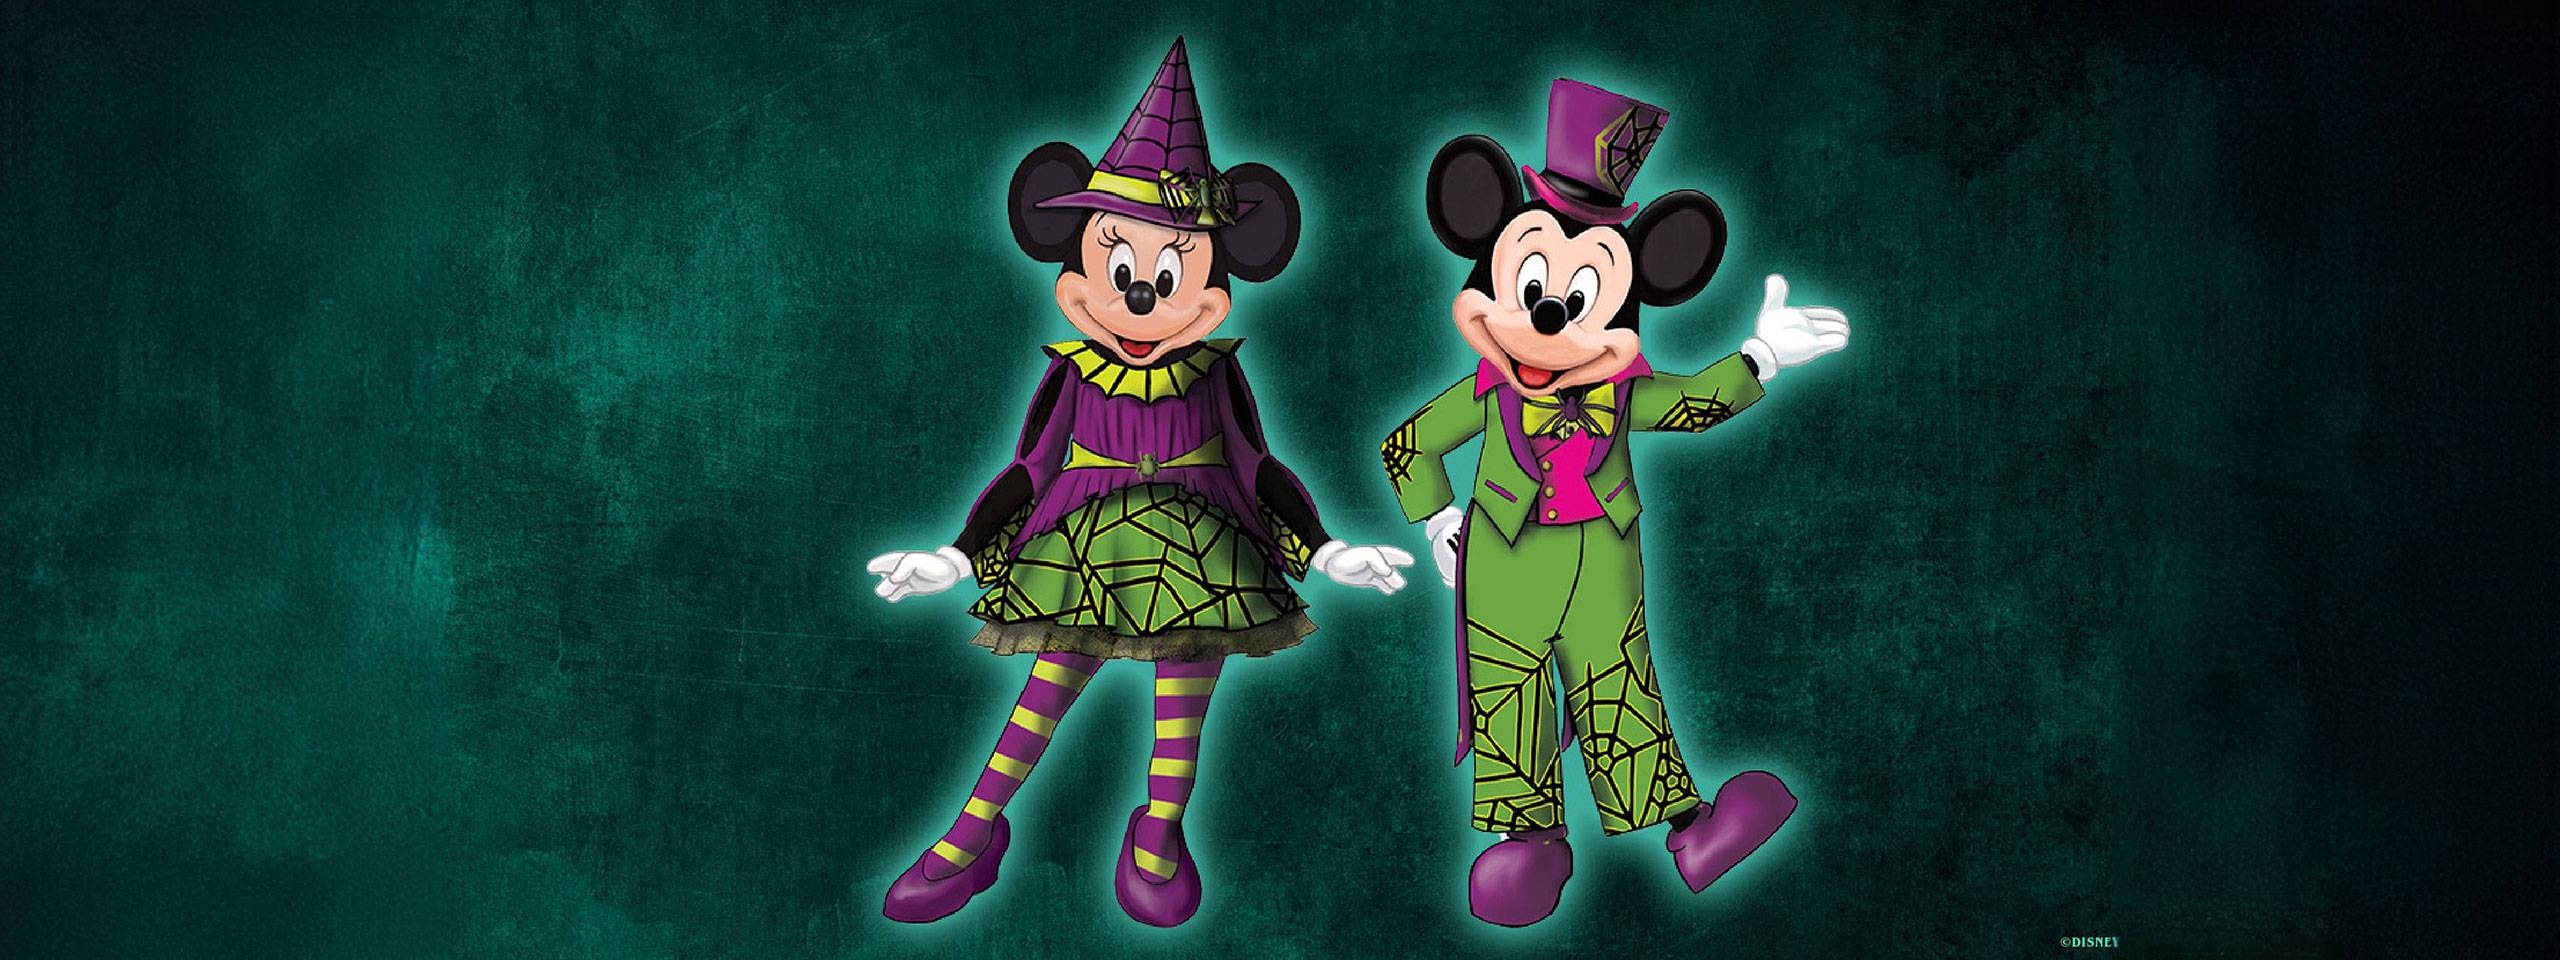 Disney World's Mickey's Not-So-Scary Halloween Party gets its earliest-ever start date in 2024